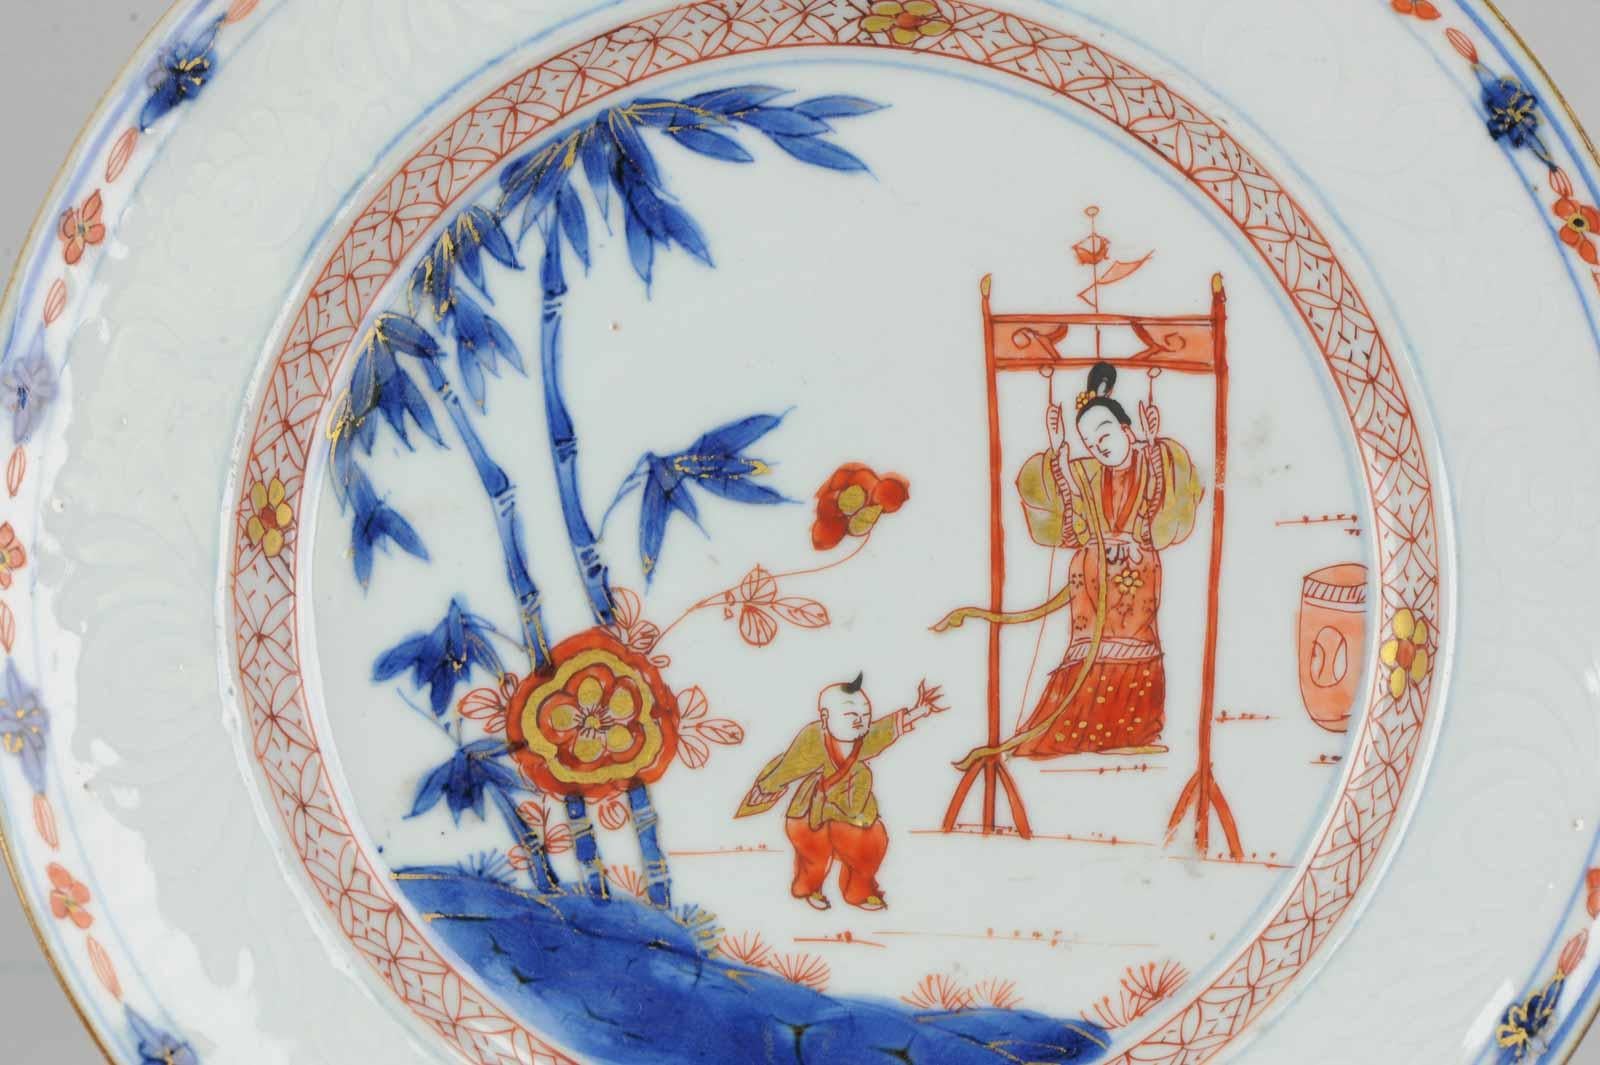 Dish on footring with a flat, underglaze brown-edged, rim (jia mangkou). Chinese Imari, decorated in underglaze blue, overglaze iron-red, black and gold. In the centre a Chinese garden scene with a flowering peony plant and a large bamboo tree with